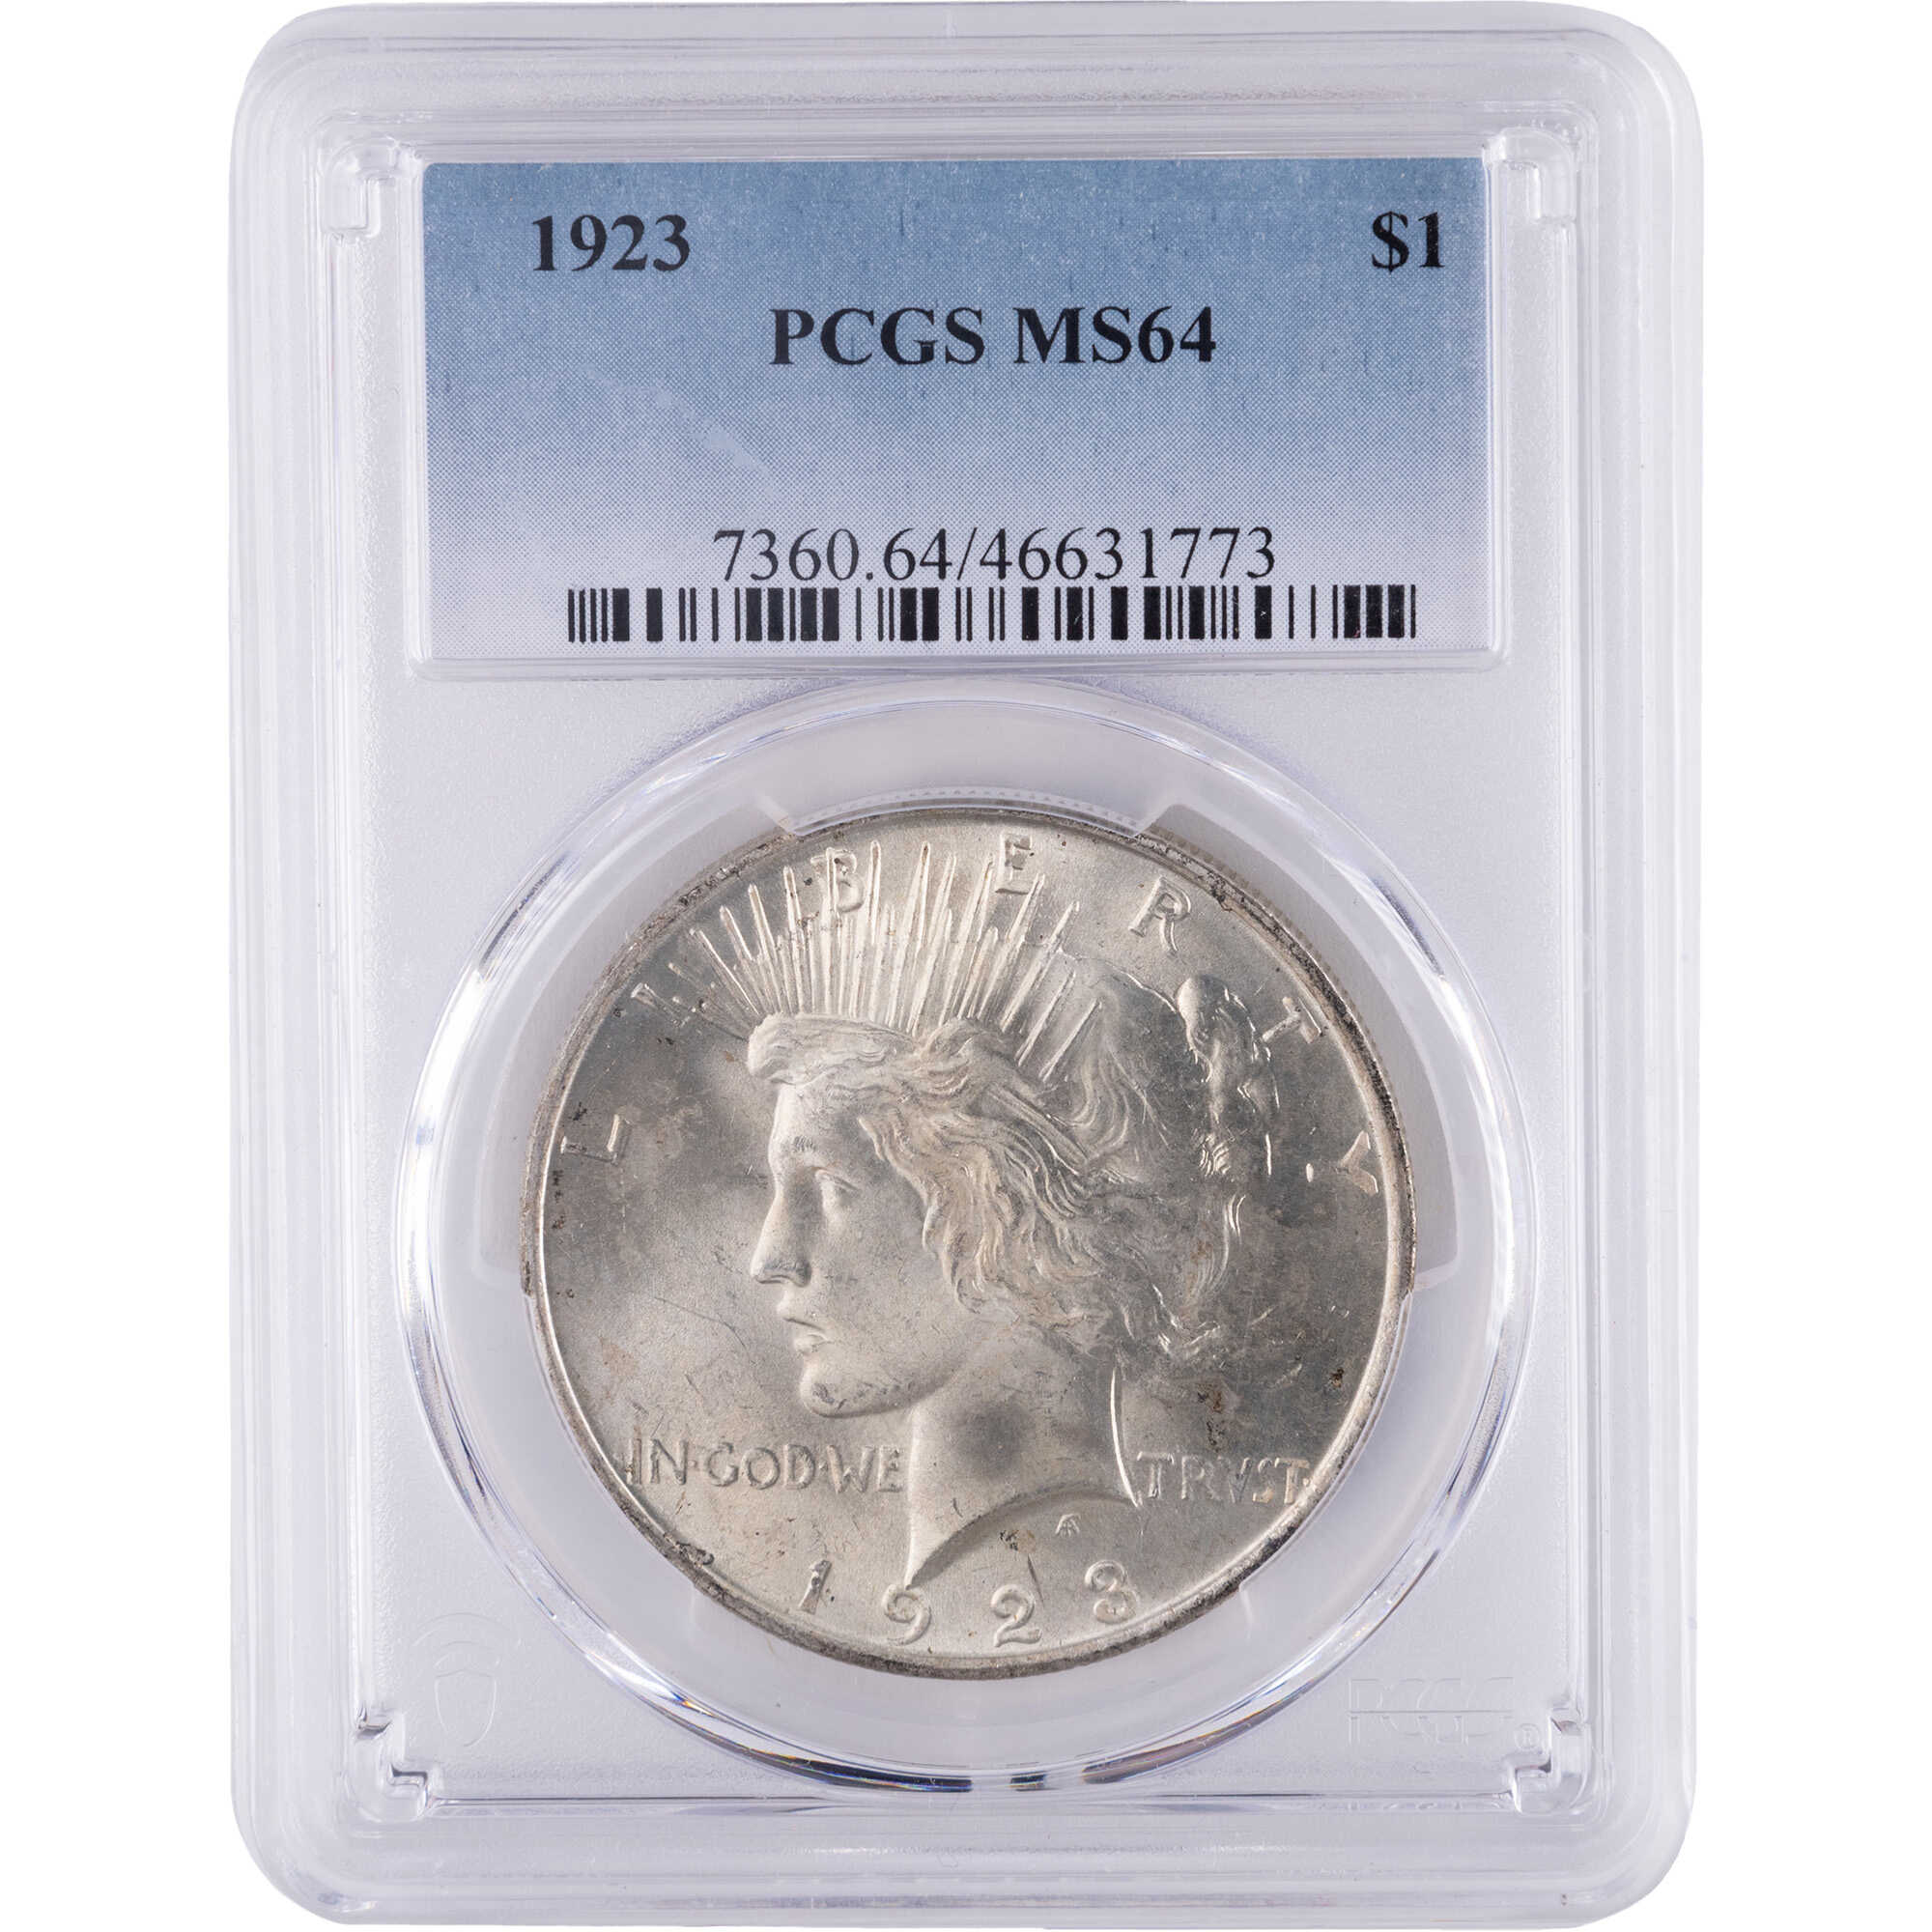 1923 Peace Dollar MS 64 PCGS Silver $1 Uncirculated Coin SKU:I12849